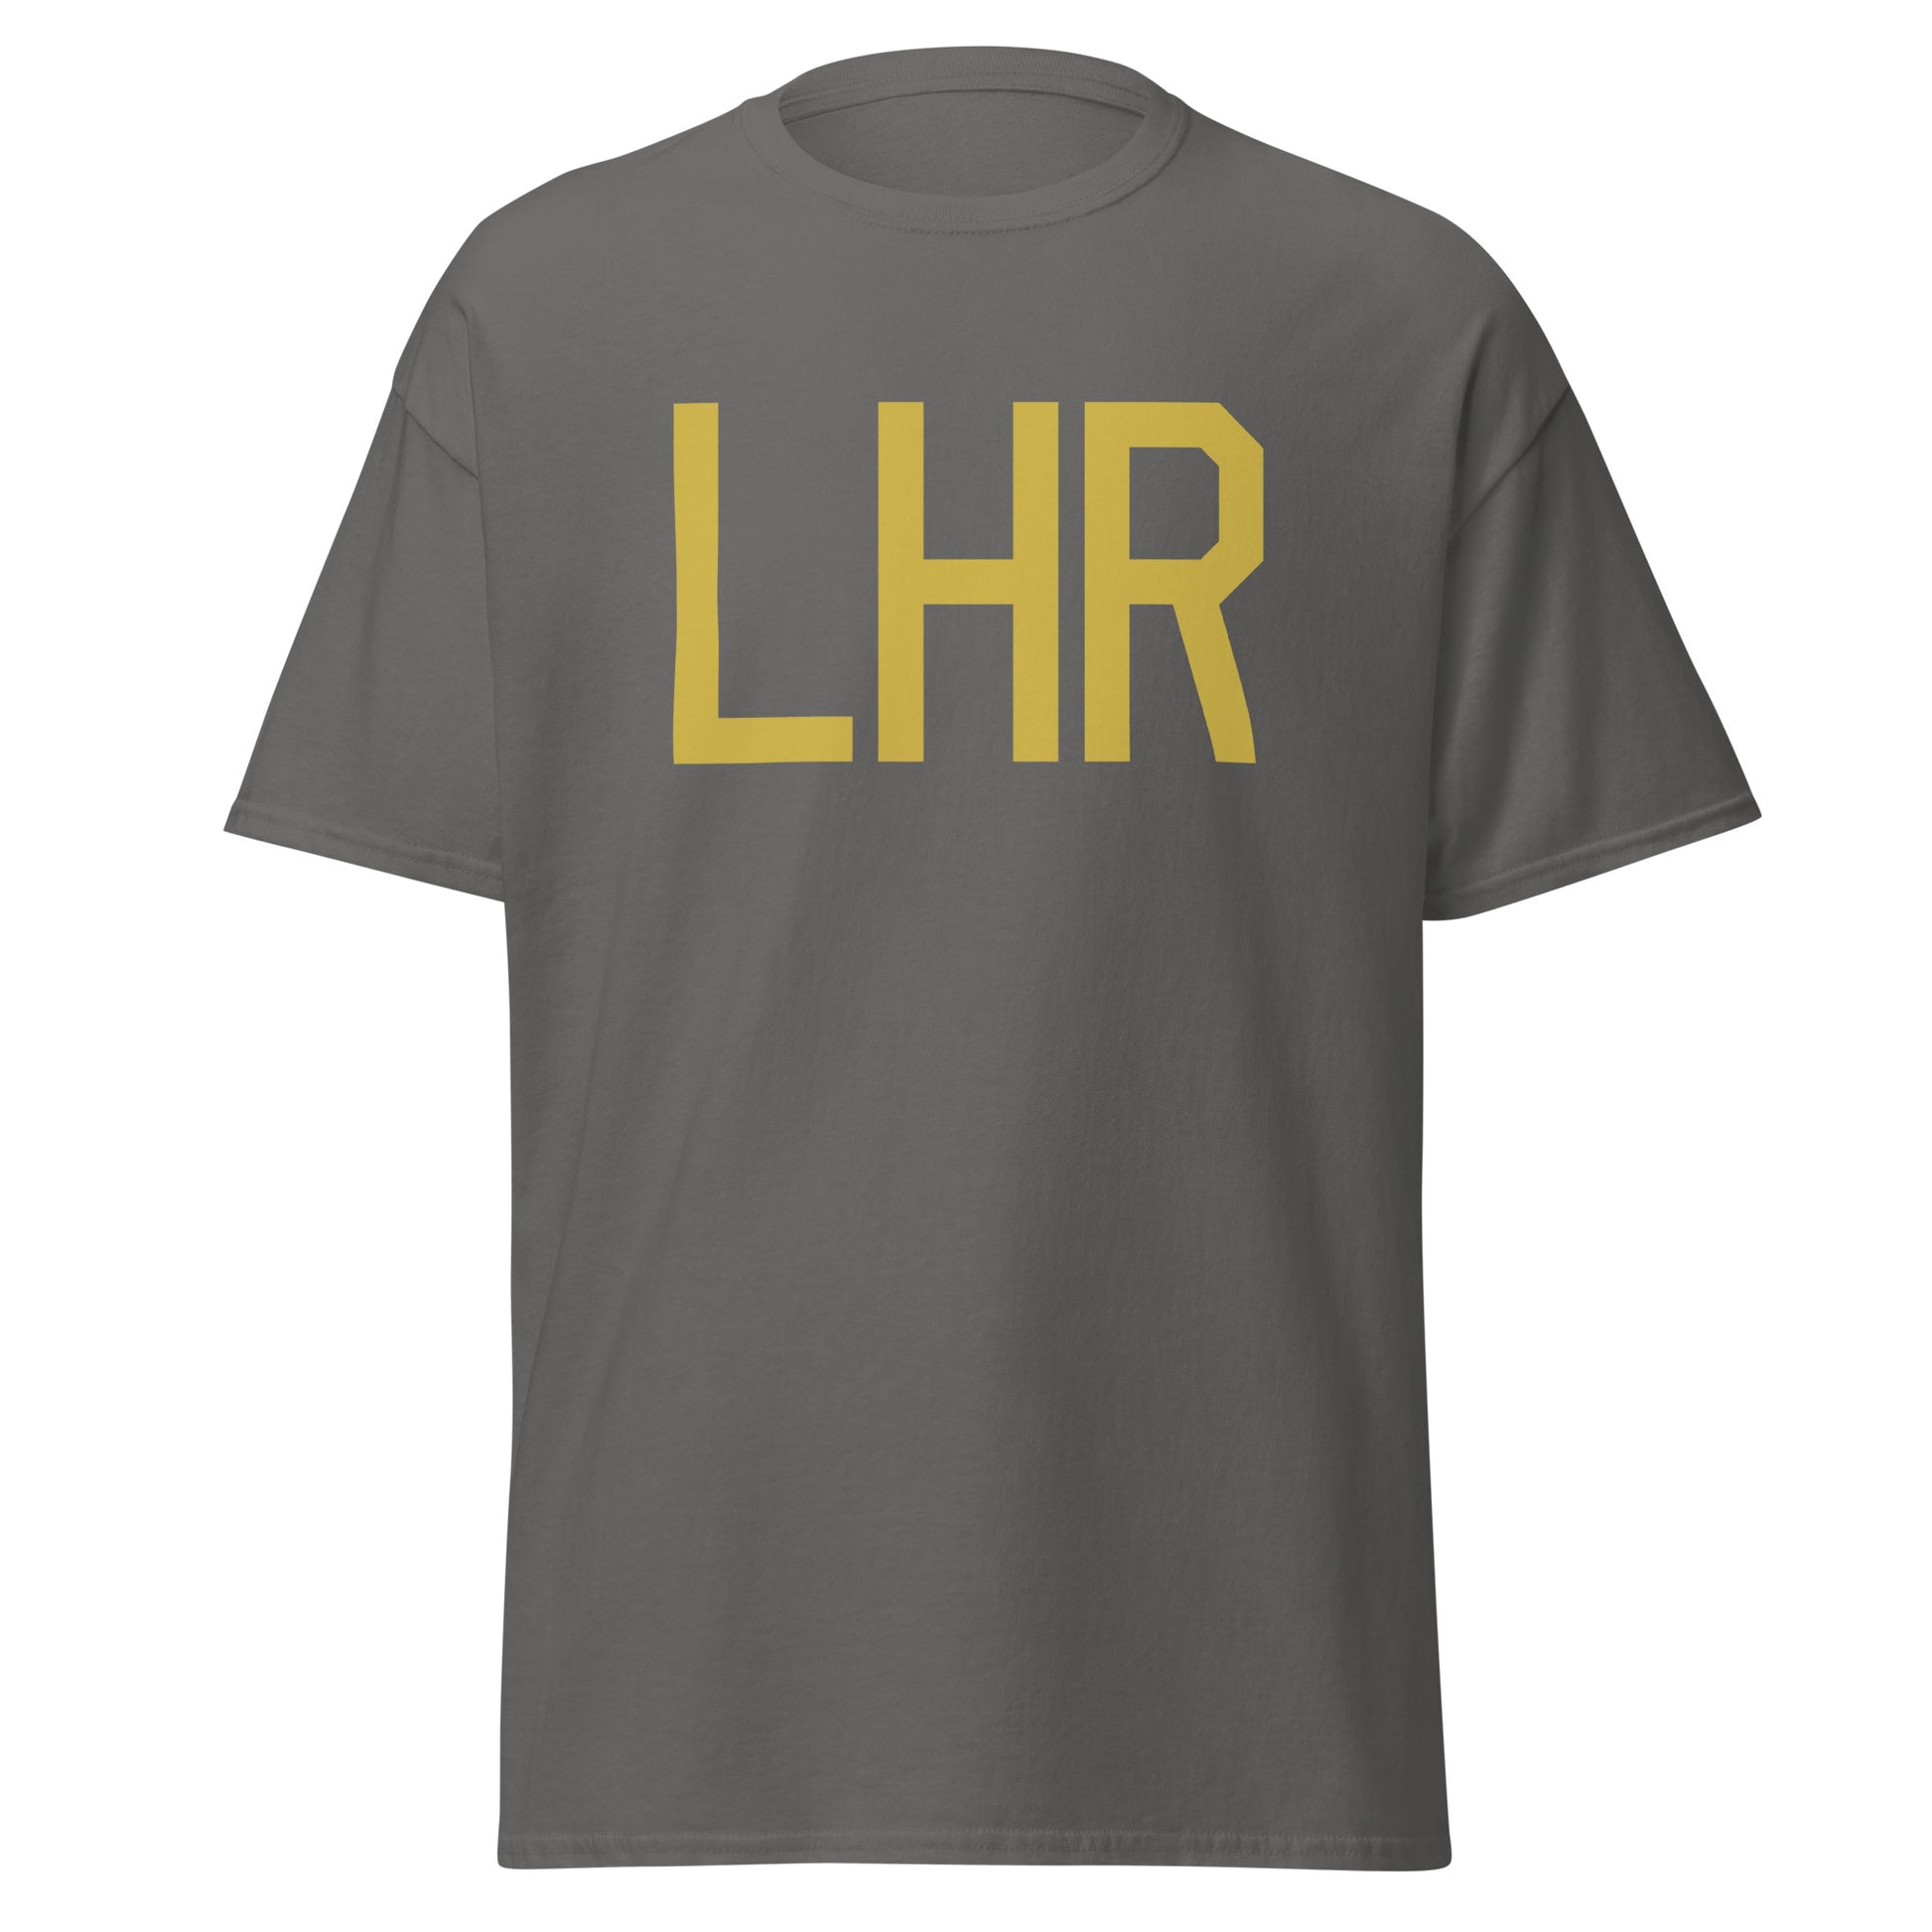 Aviation Enthusiast Men's Tee - Old Gold Graphic • LHR London • YHM Designs - Image 05